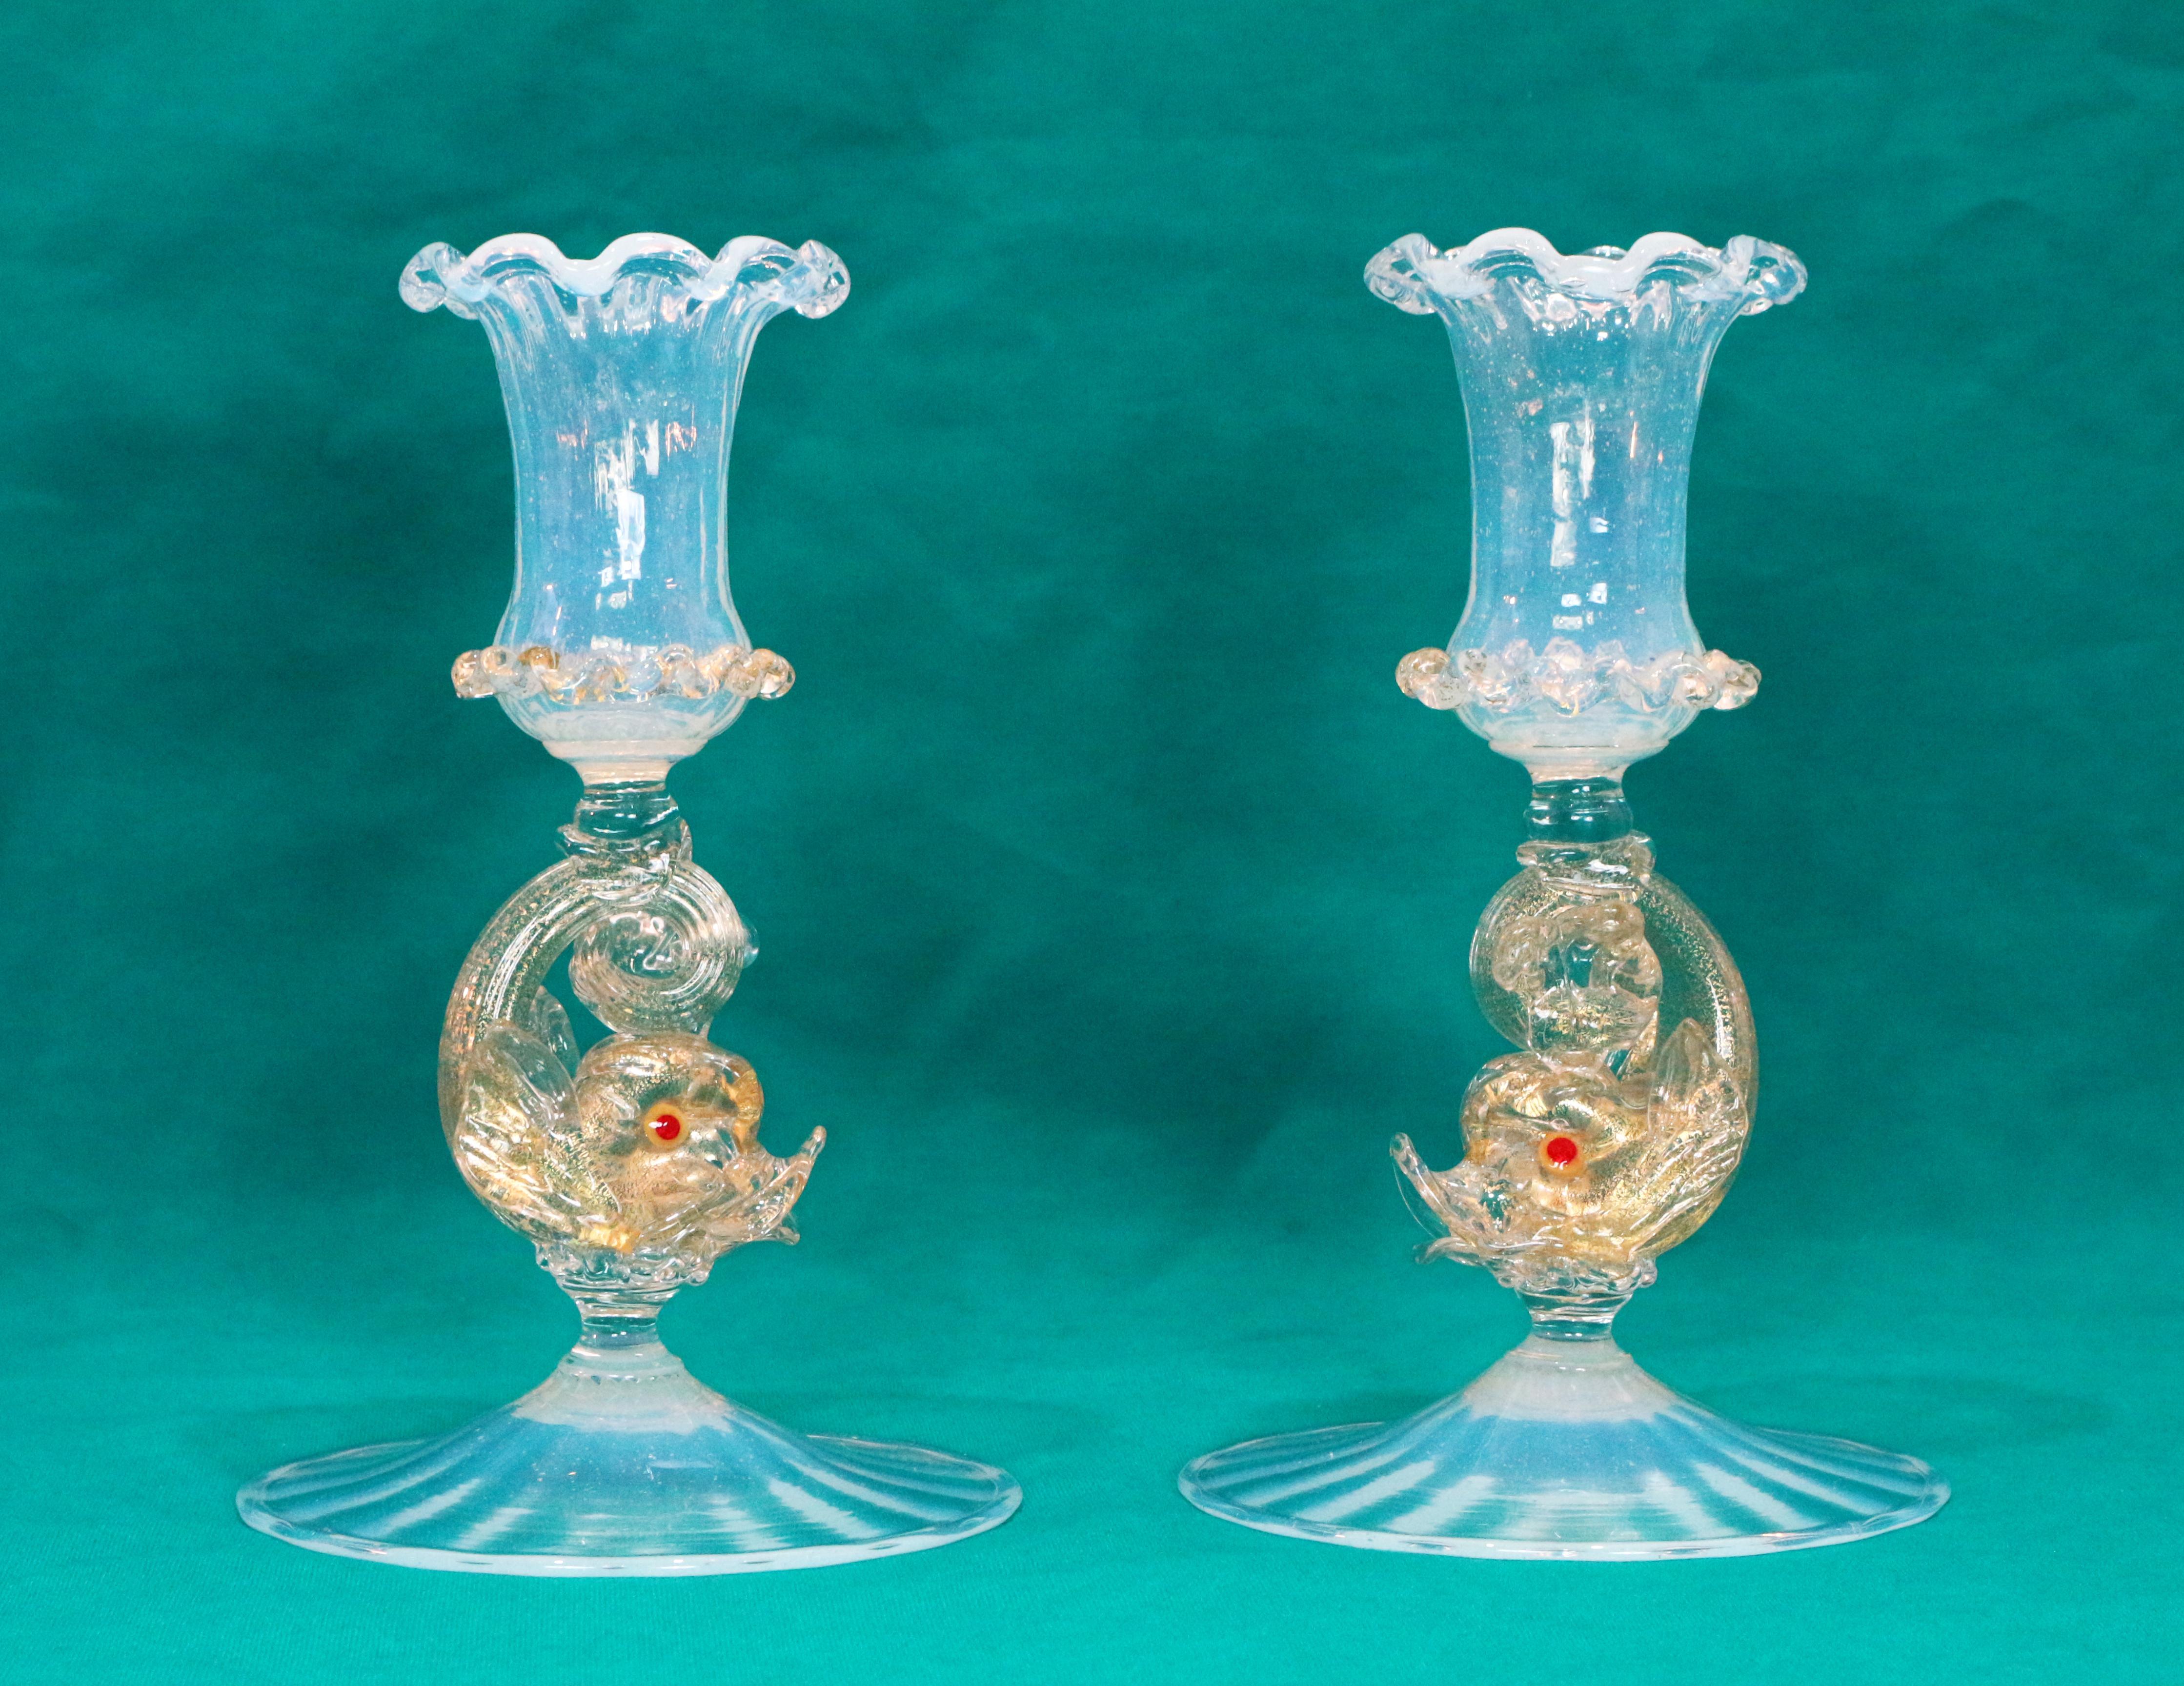 Pair of early-20th gold opal venetian candlestick by A.Salviati (20. Jahrhundert)